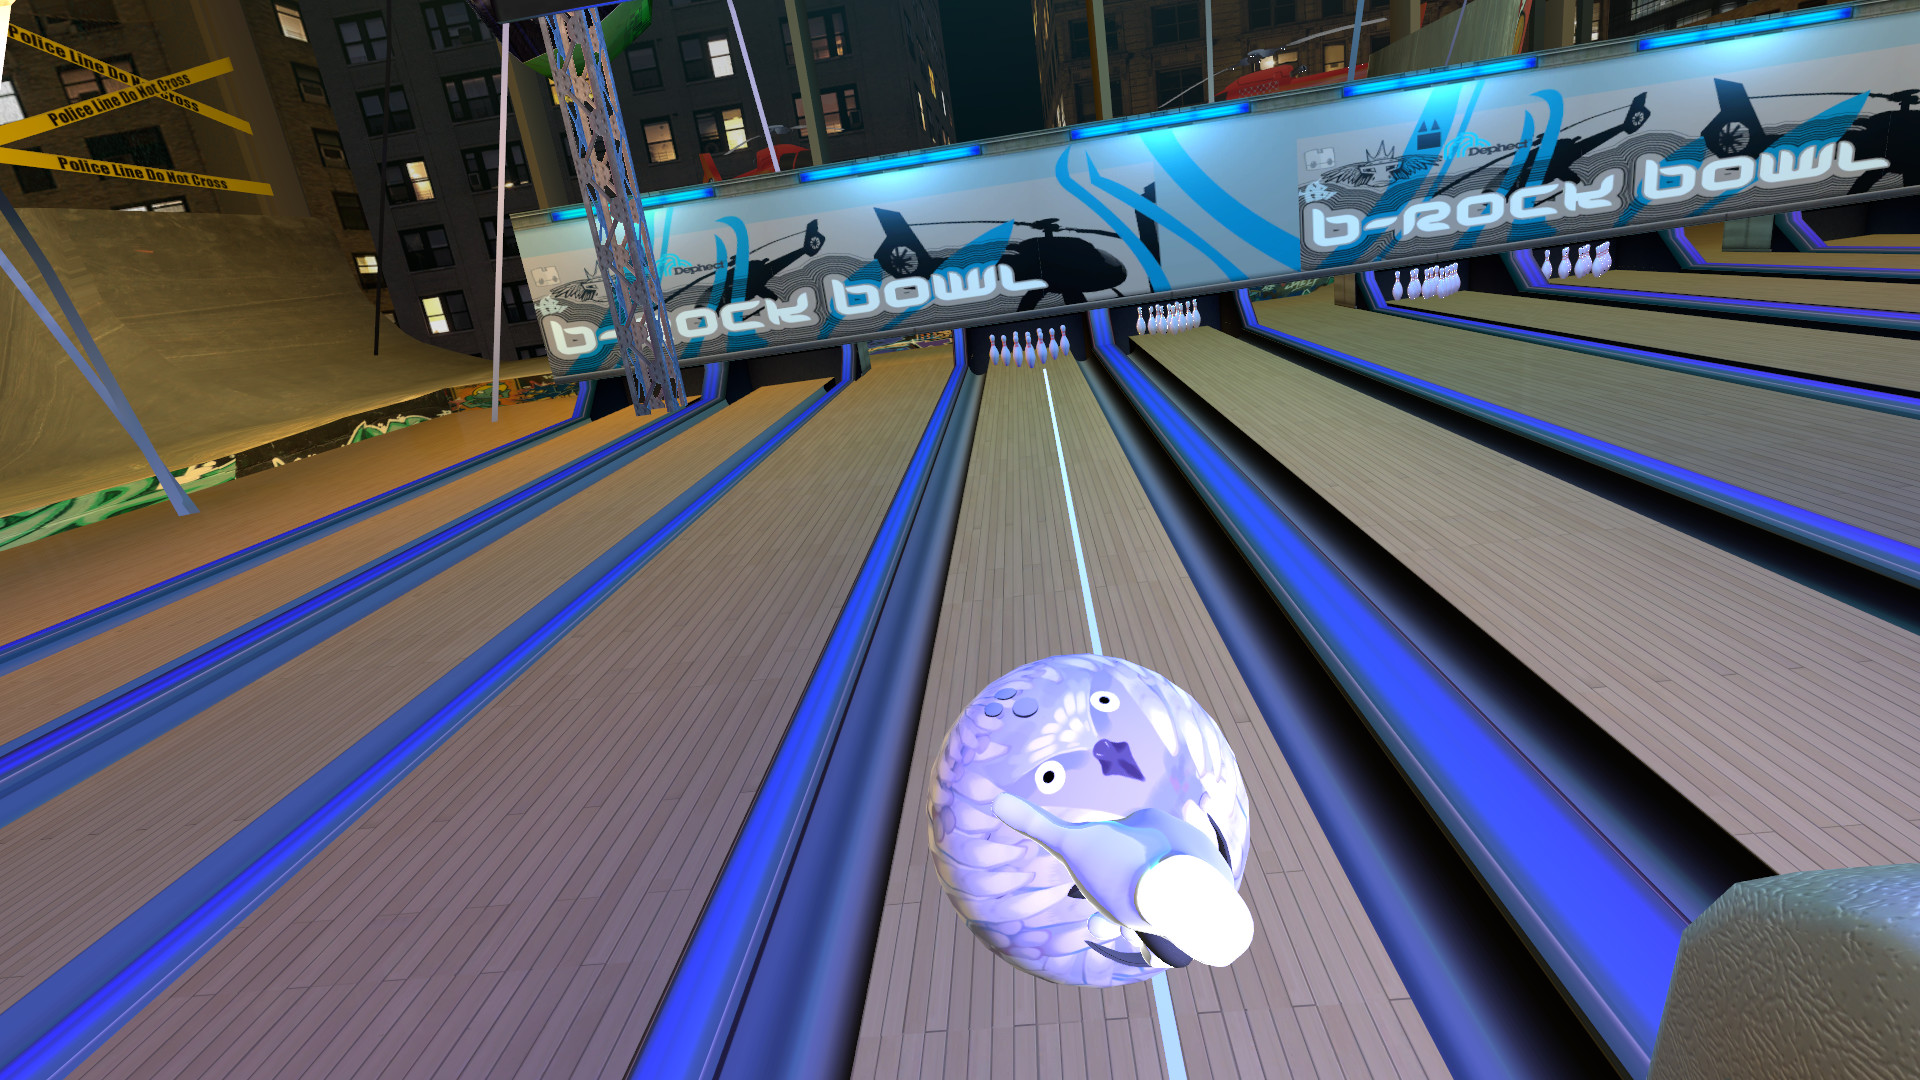 Bowling Over It on Steam